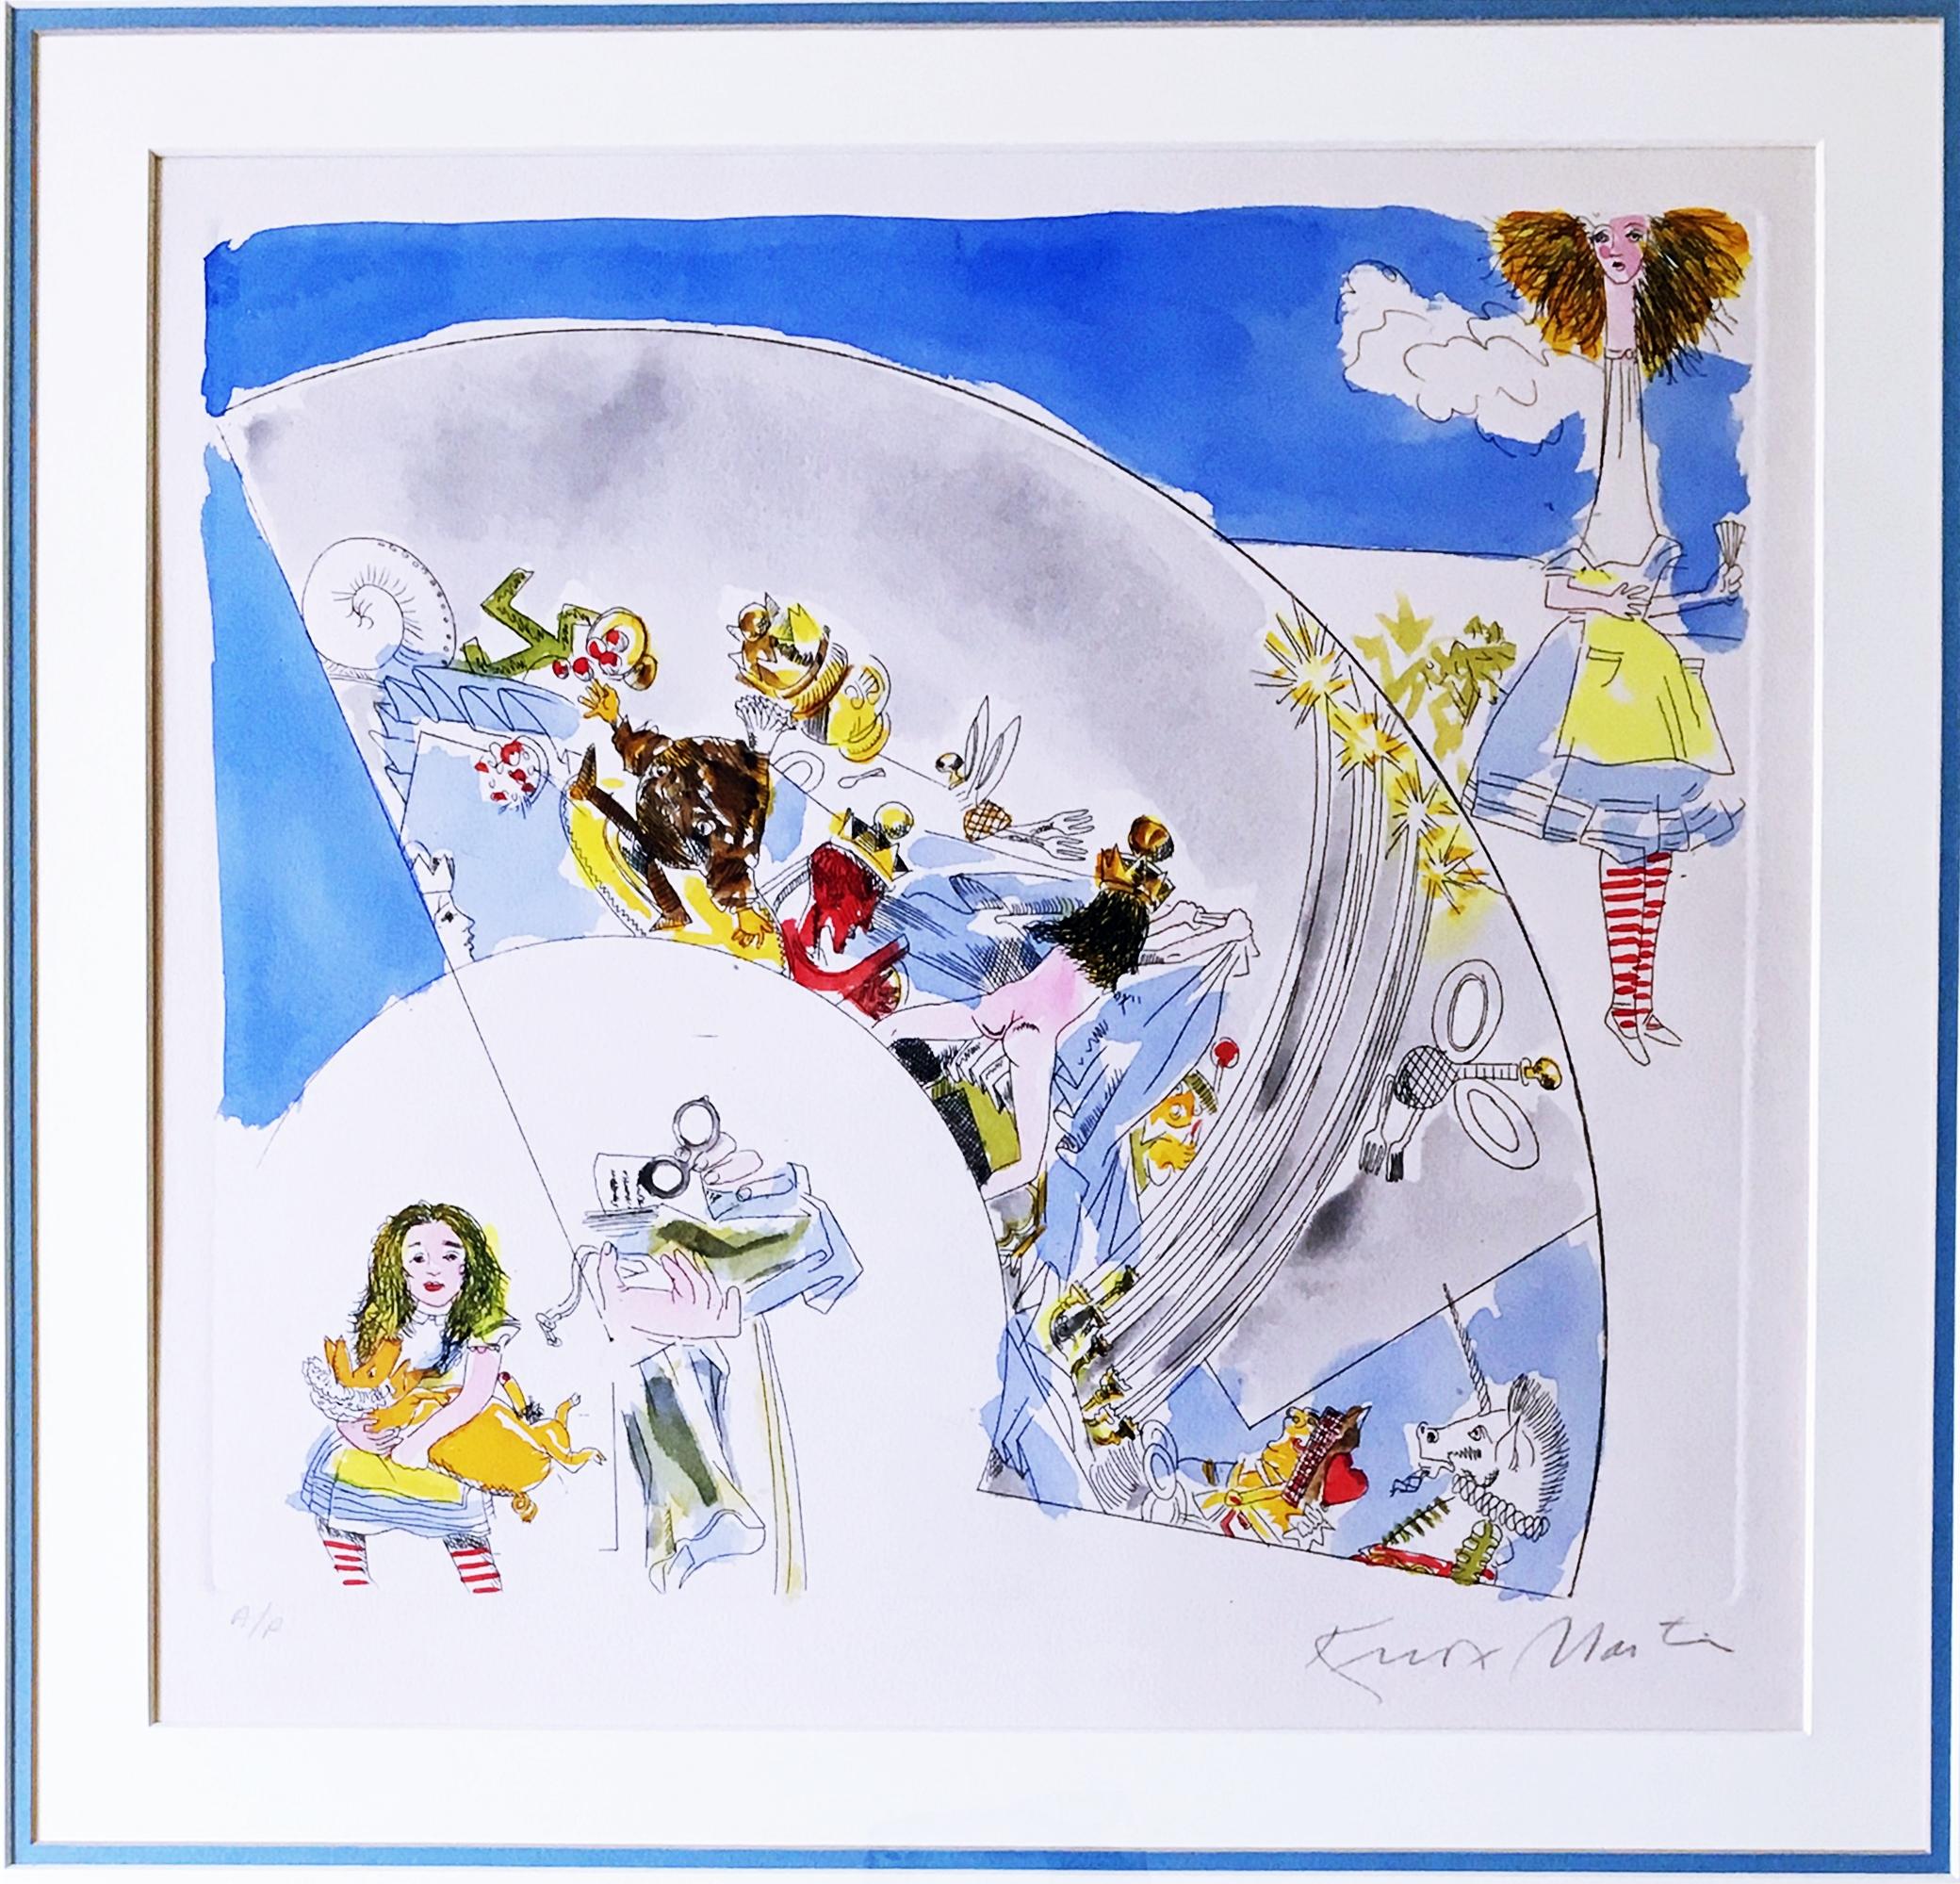 Knox Martin
Alice in Wonderland, ca. 1972
Etching with hand-coloring in watercolor on wove paper
Hand signed and annotated 